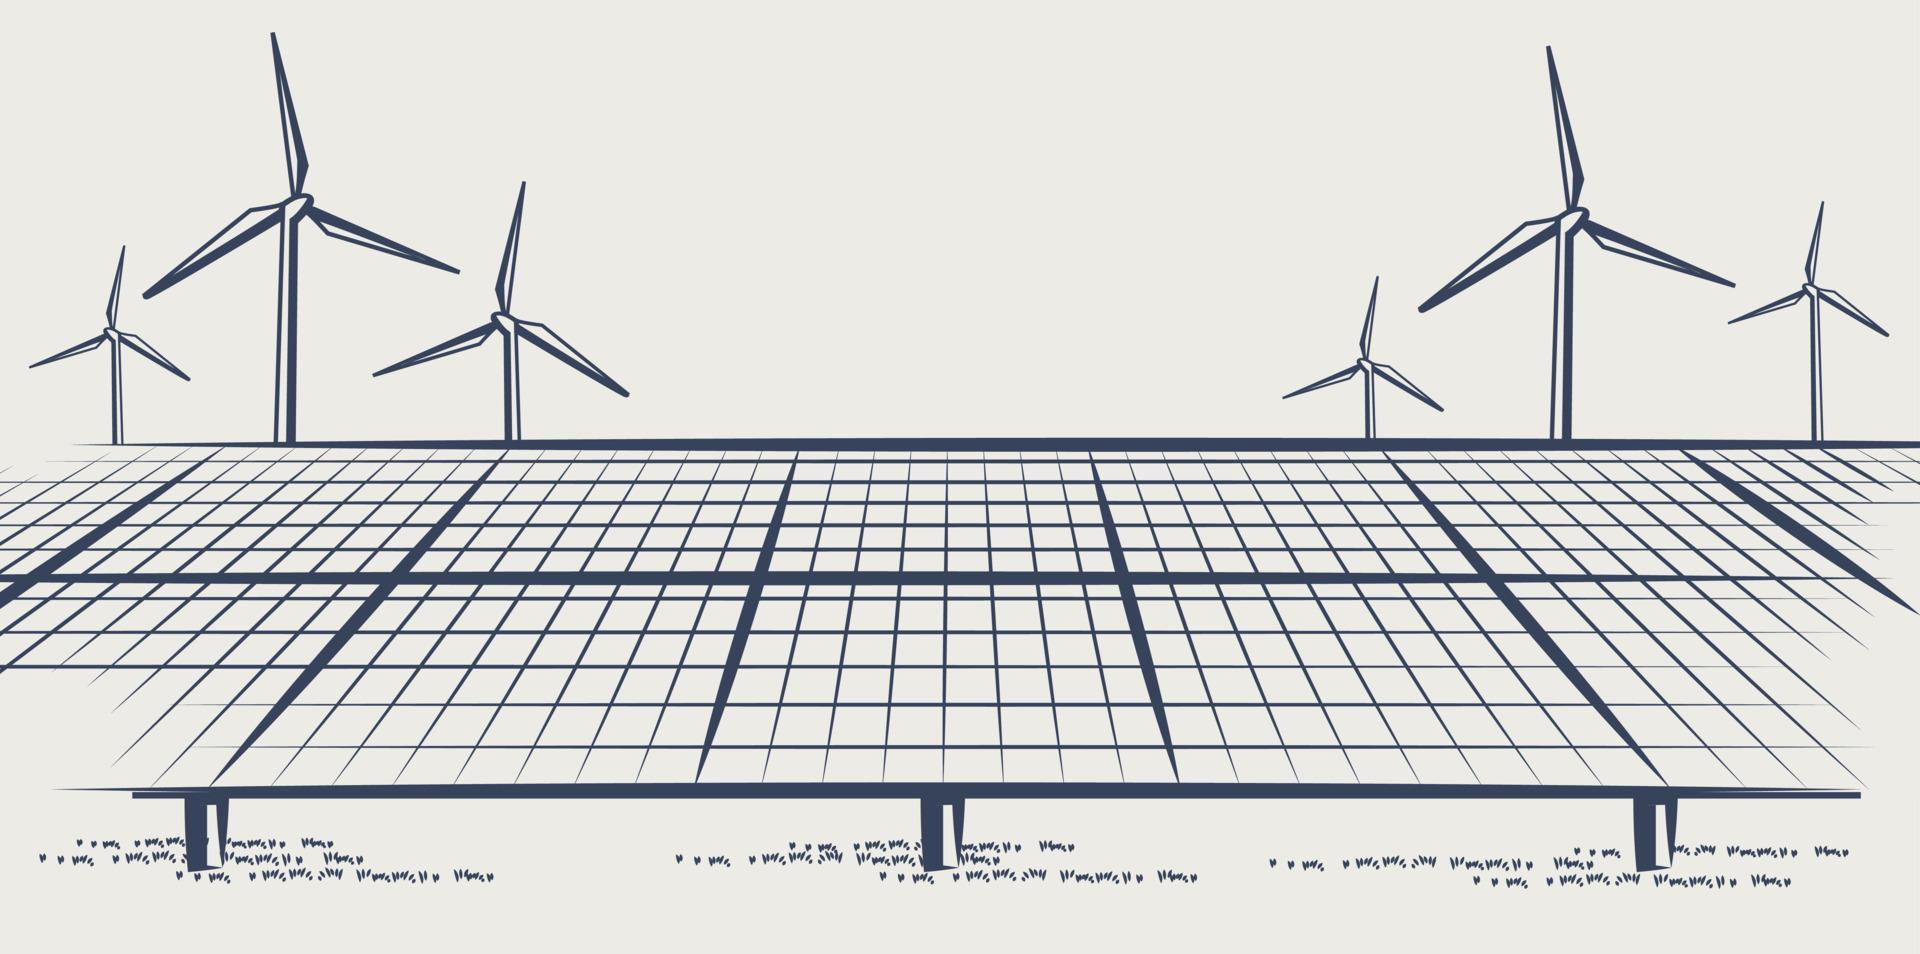 Solar panels and wind turbines or alternative sources of energy. Ecological sustainable energy supply. Vector illustration design.